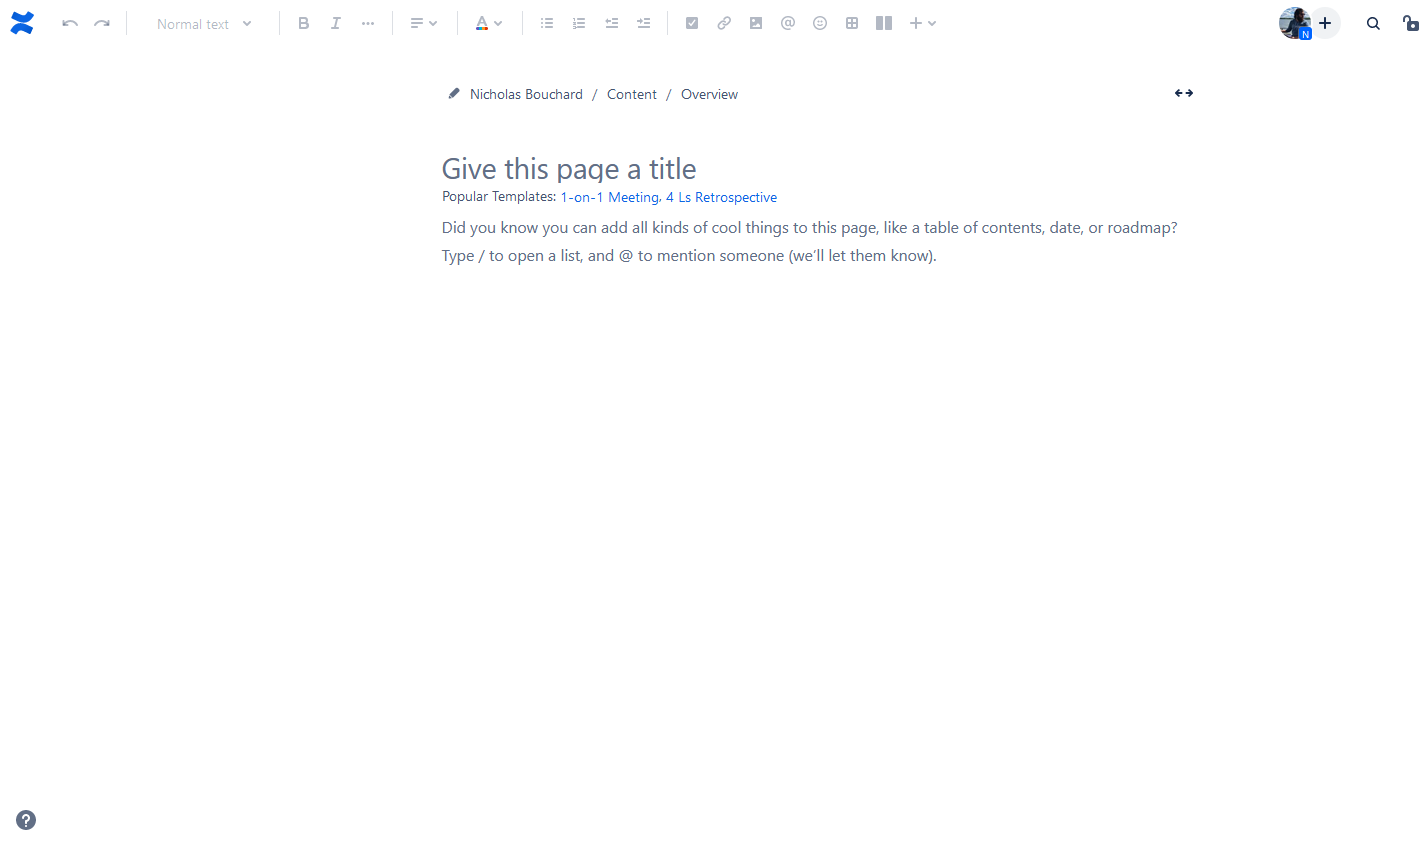 A screenshot of an empty page in Confluence.